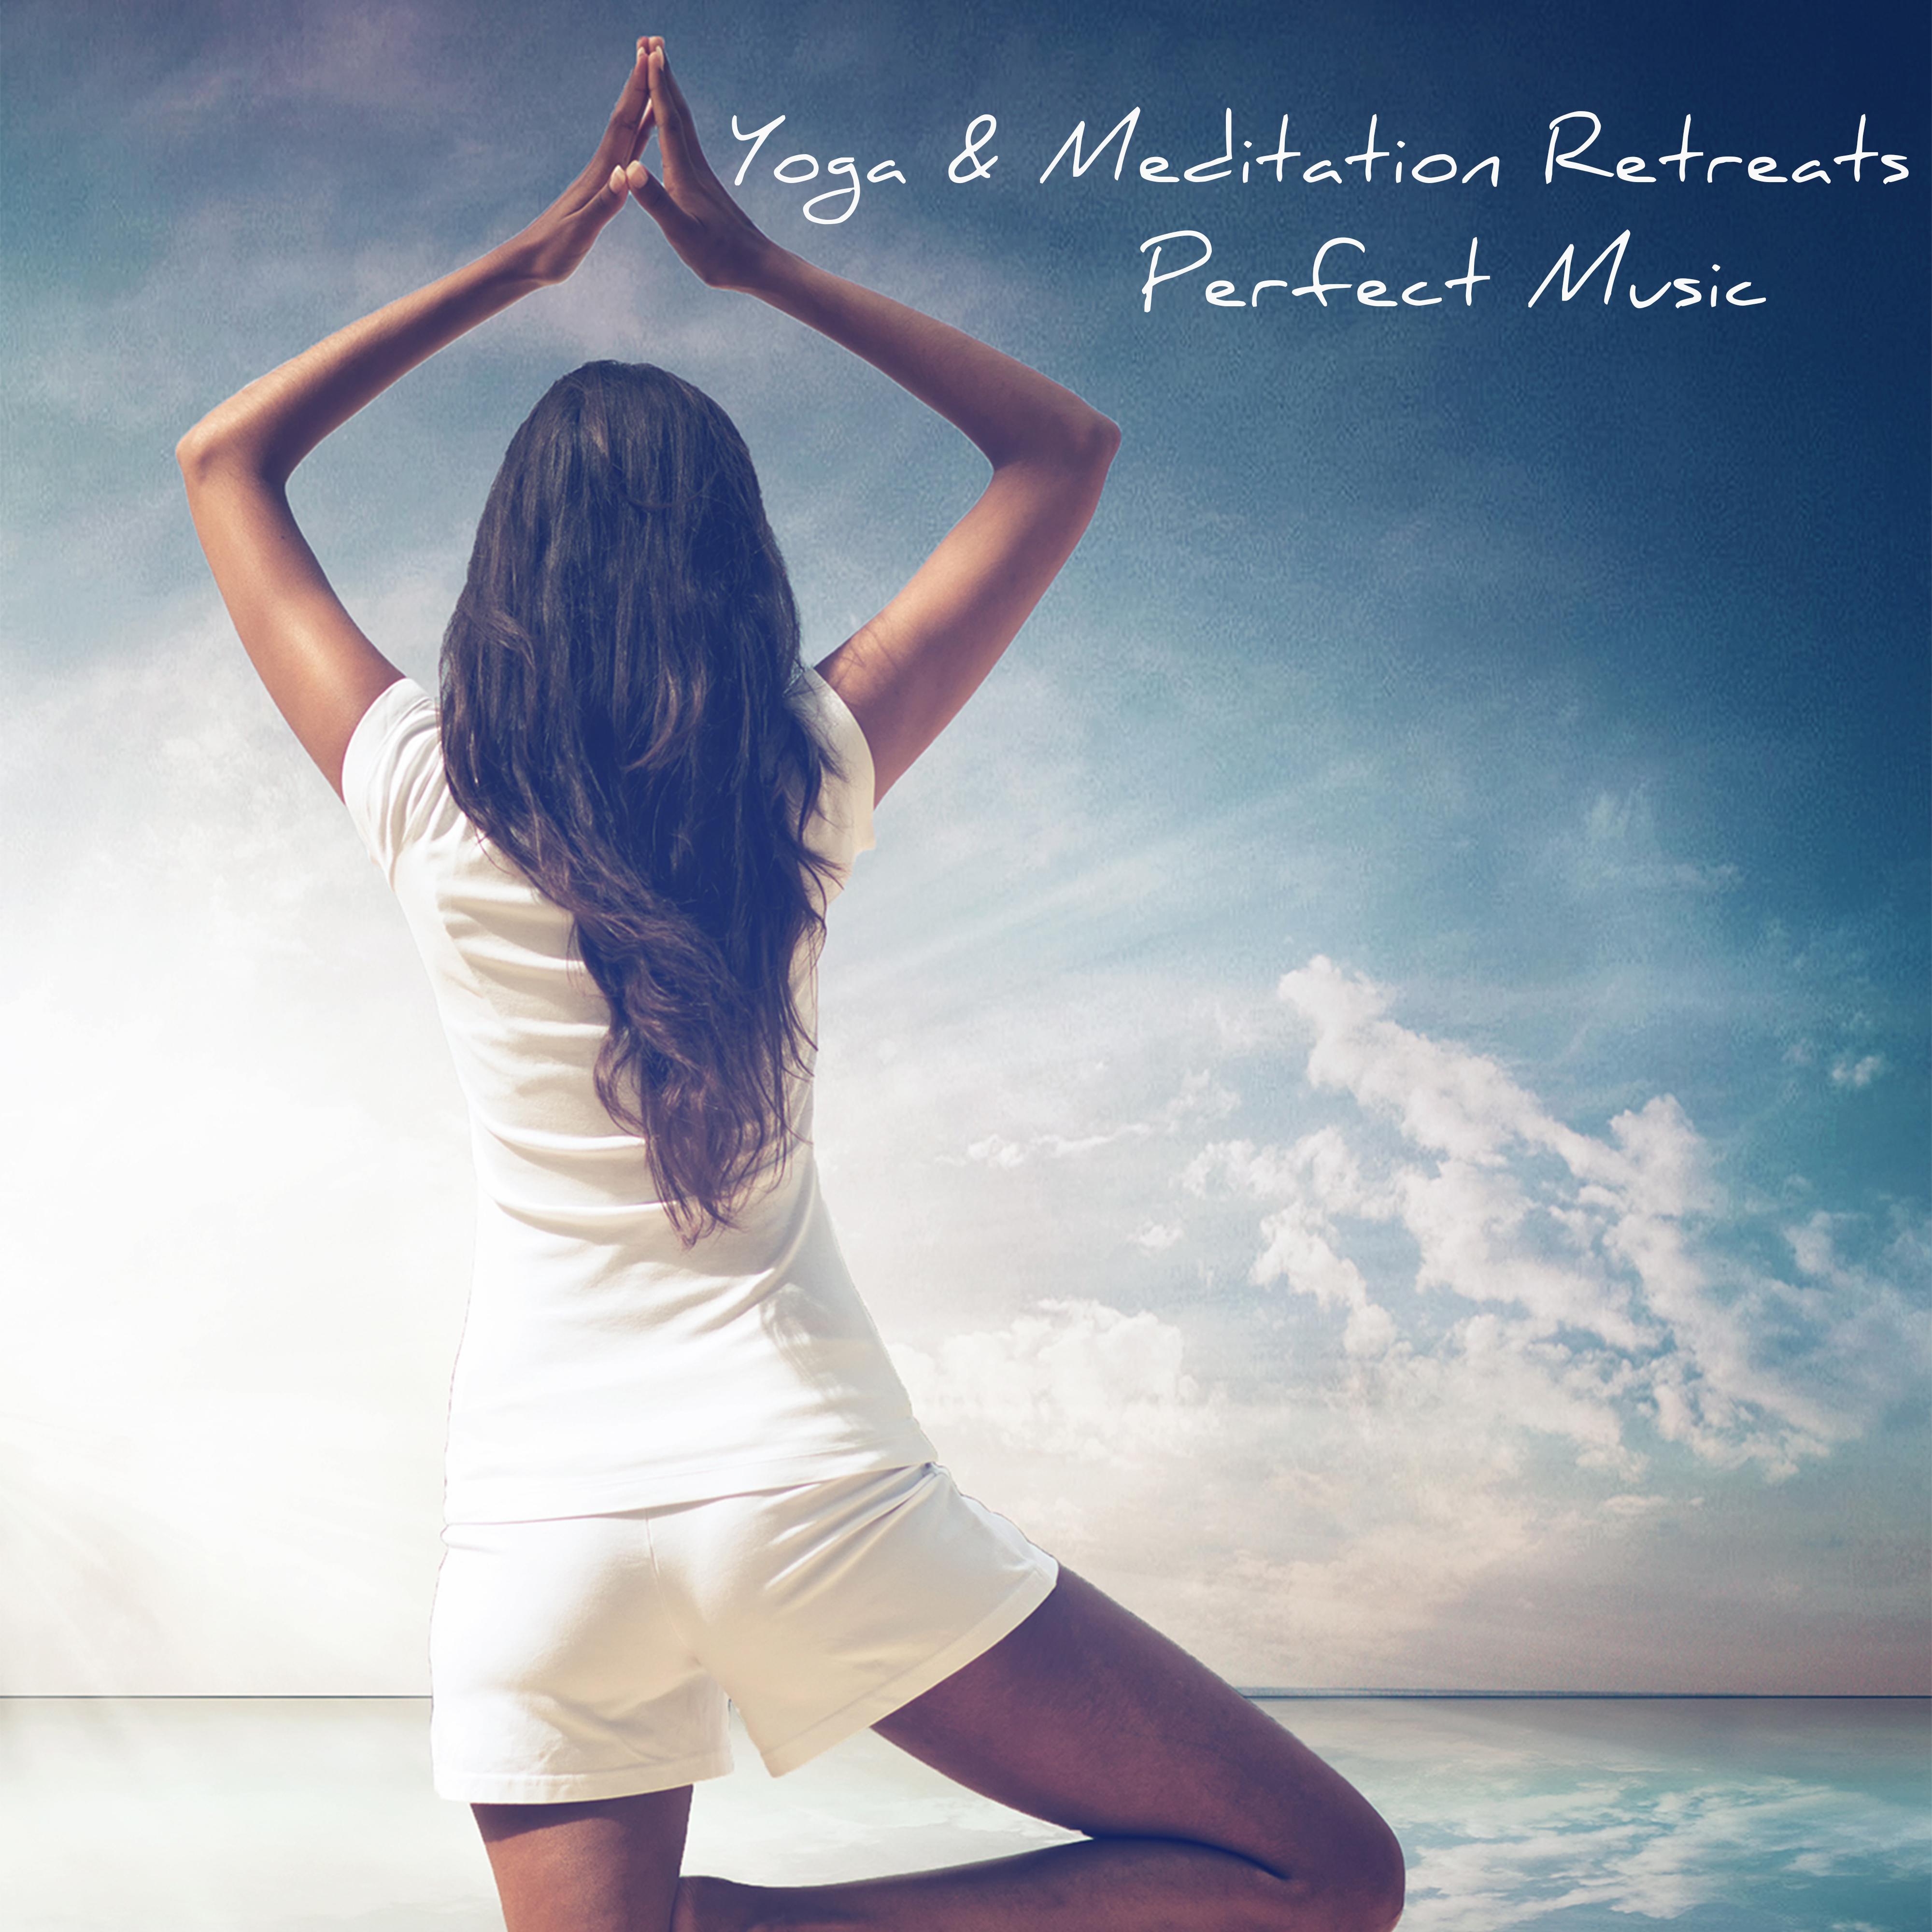 Yoga  Meditation Retreats Perfect Music  Calm and Free your Mind with Zen Meditation Music